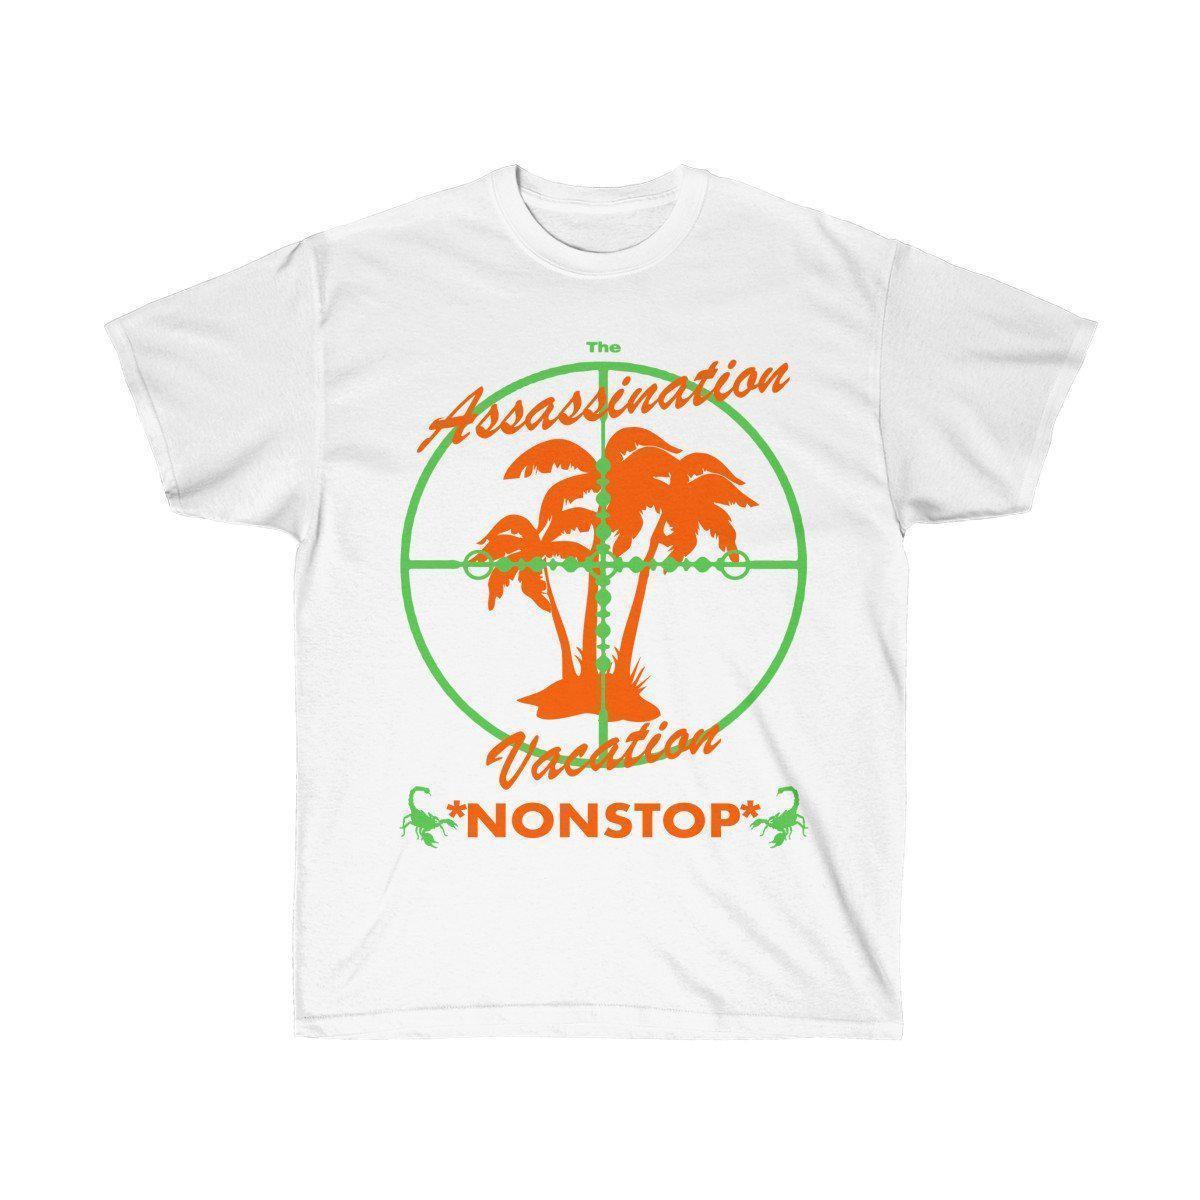 Assassination Vacation Tour Drake merch inspired - Unisex Ultra Cotton Tee-White-L-Archethype